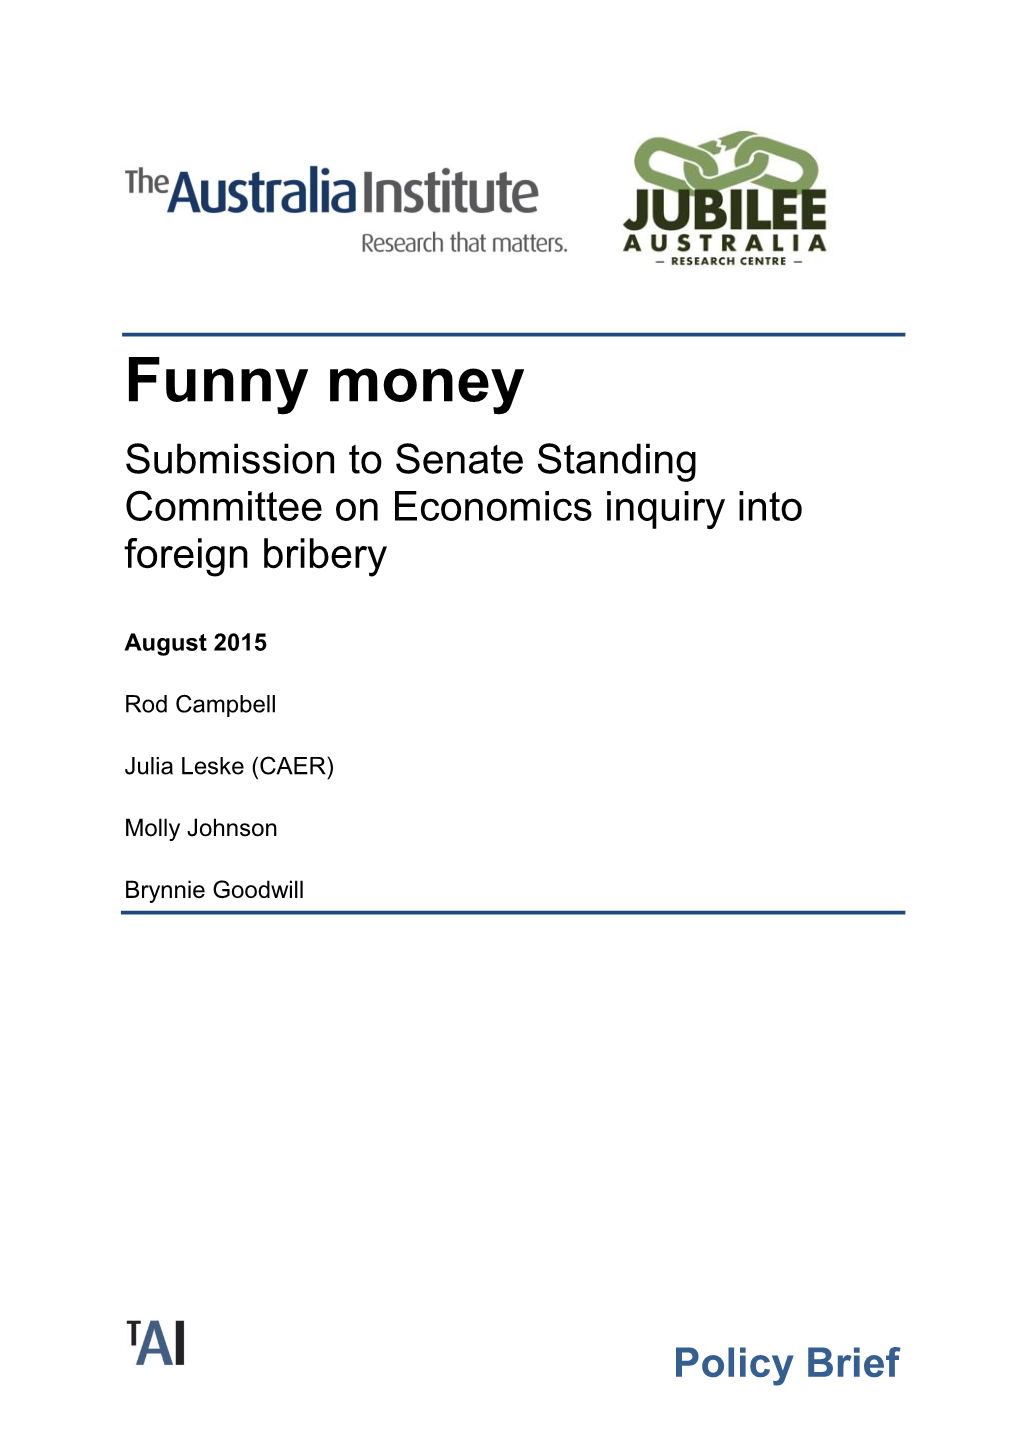 Funny Money Submission to Senate Standing Committee on Economics Inquiry Into Foreign Bribery